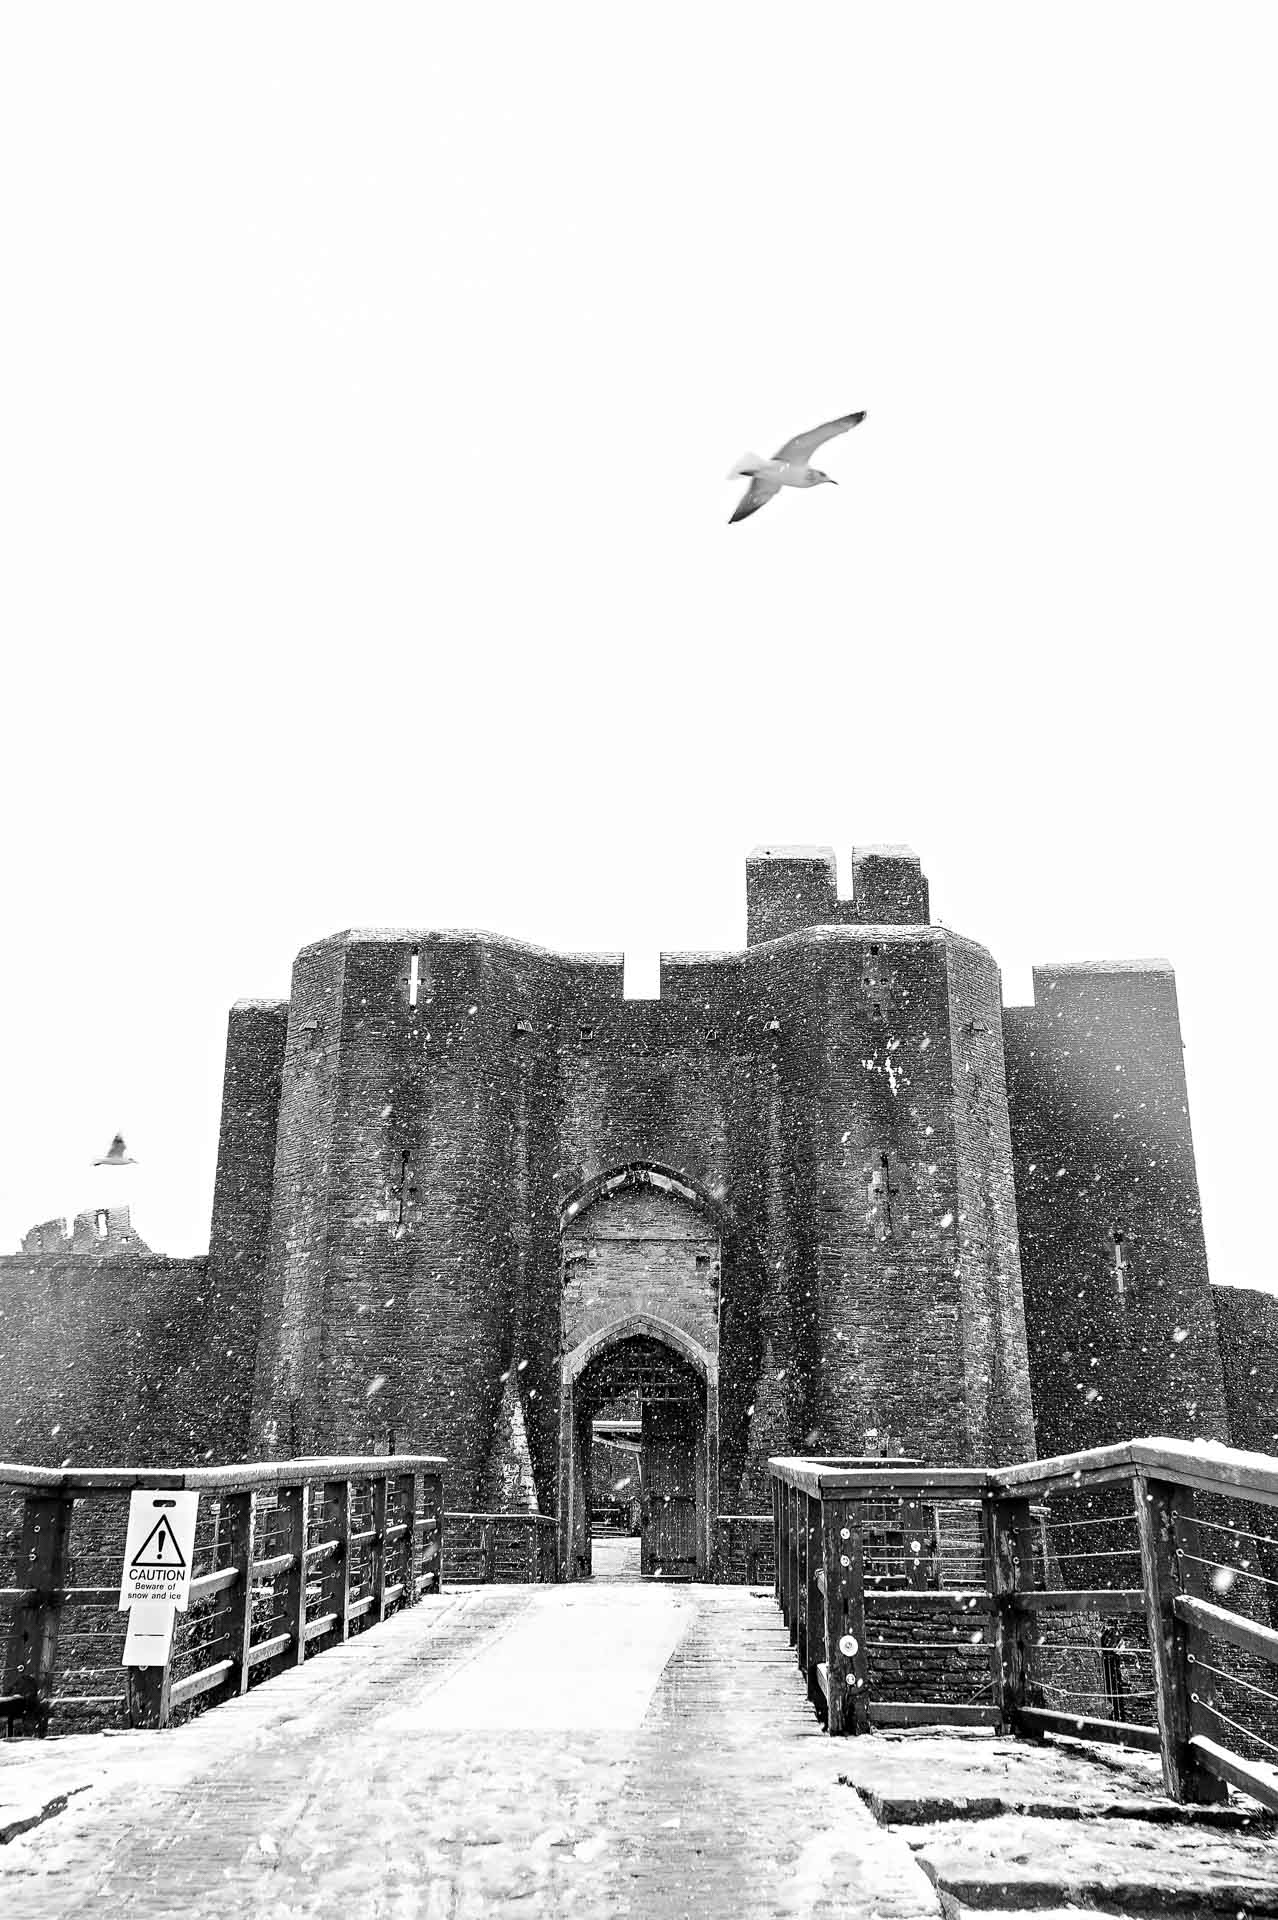 Seagulls Flying Above the Gate of Caerphilly Castle in the Snow.